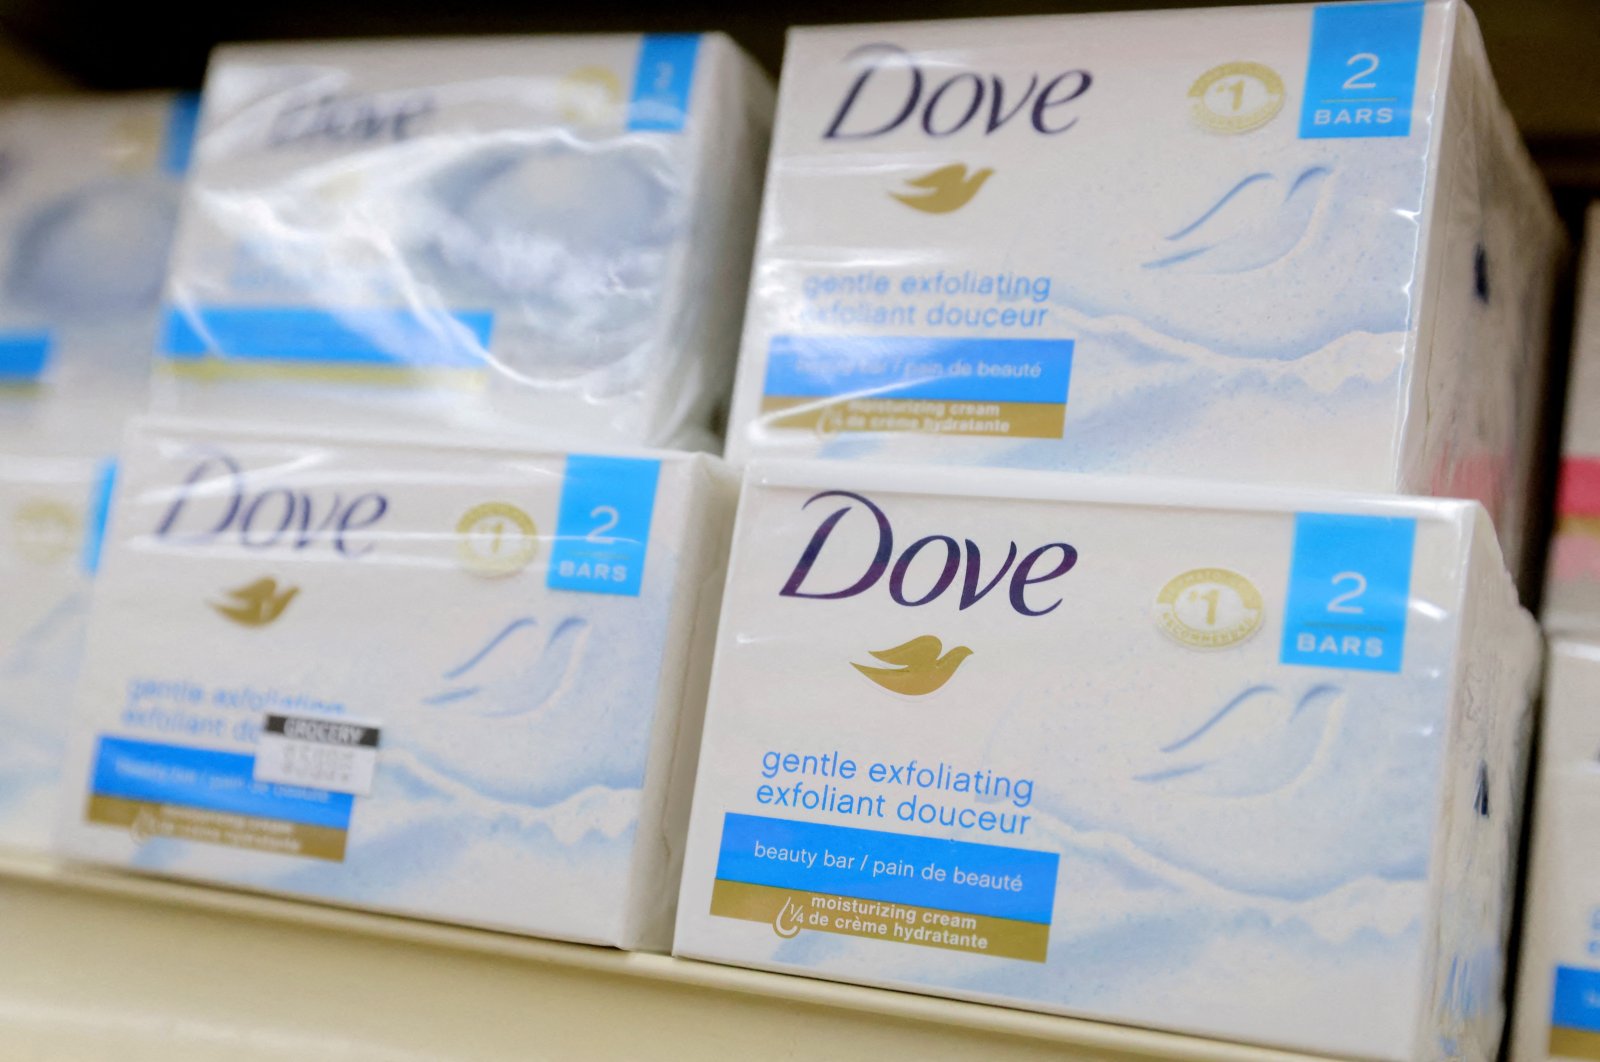 Dove, a brand of Unilever, is seen on display in a store in Manhattan, New York City, U.S., March 24, 2022. (Reuters Photo)